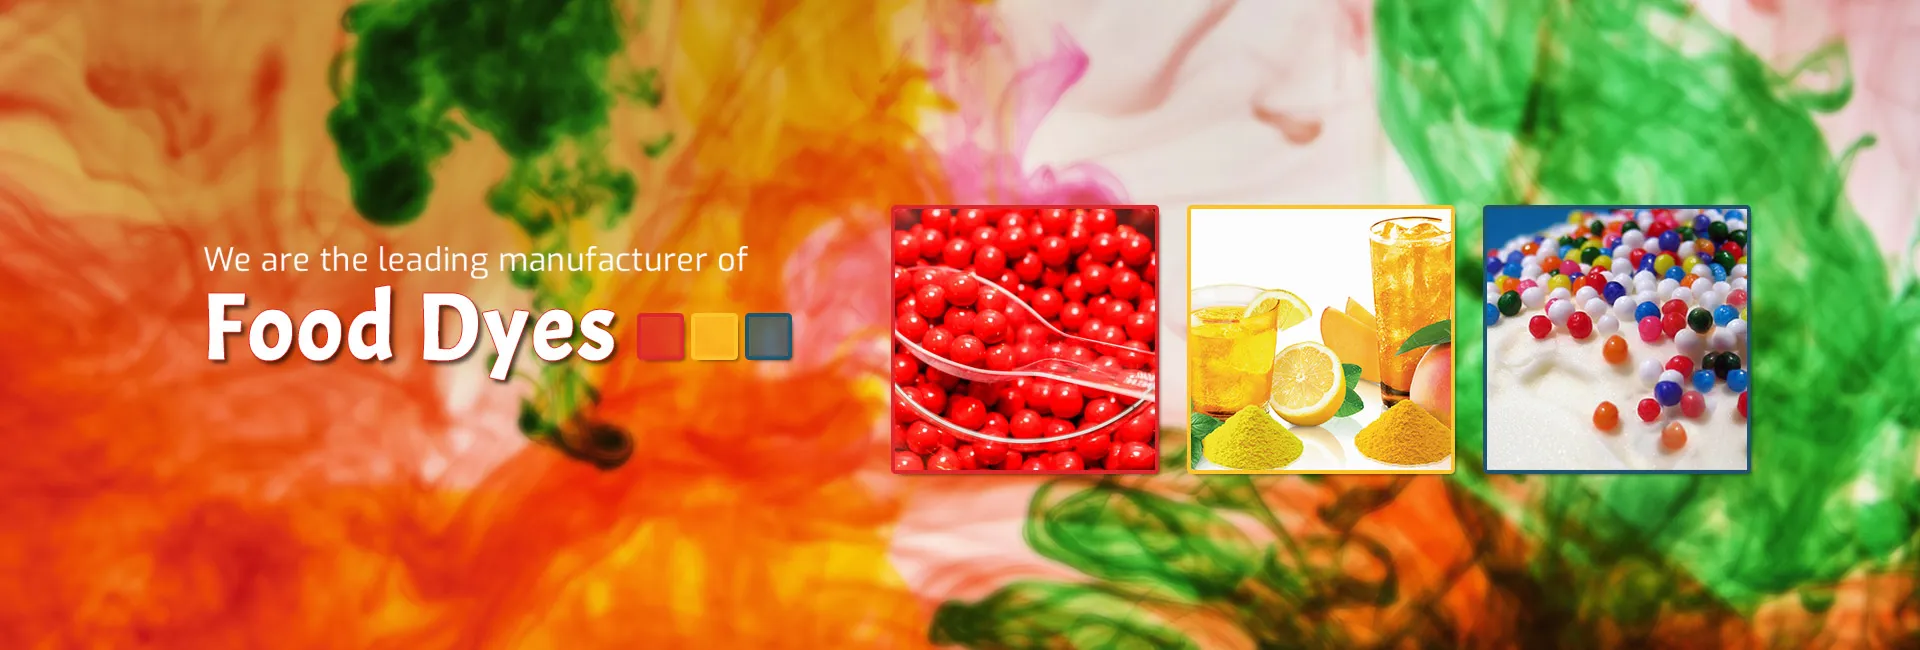 Food Dyes Manufacturer & Suppliers in Vietnam